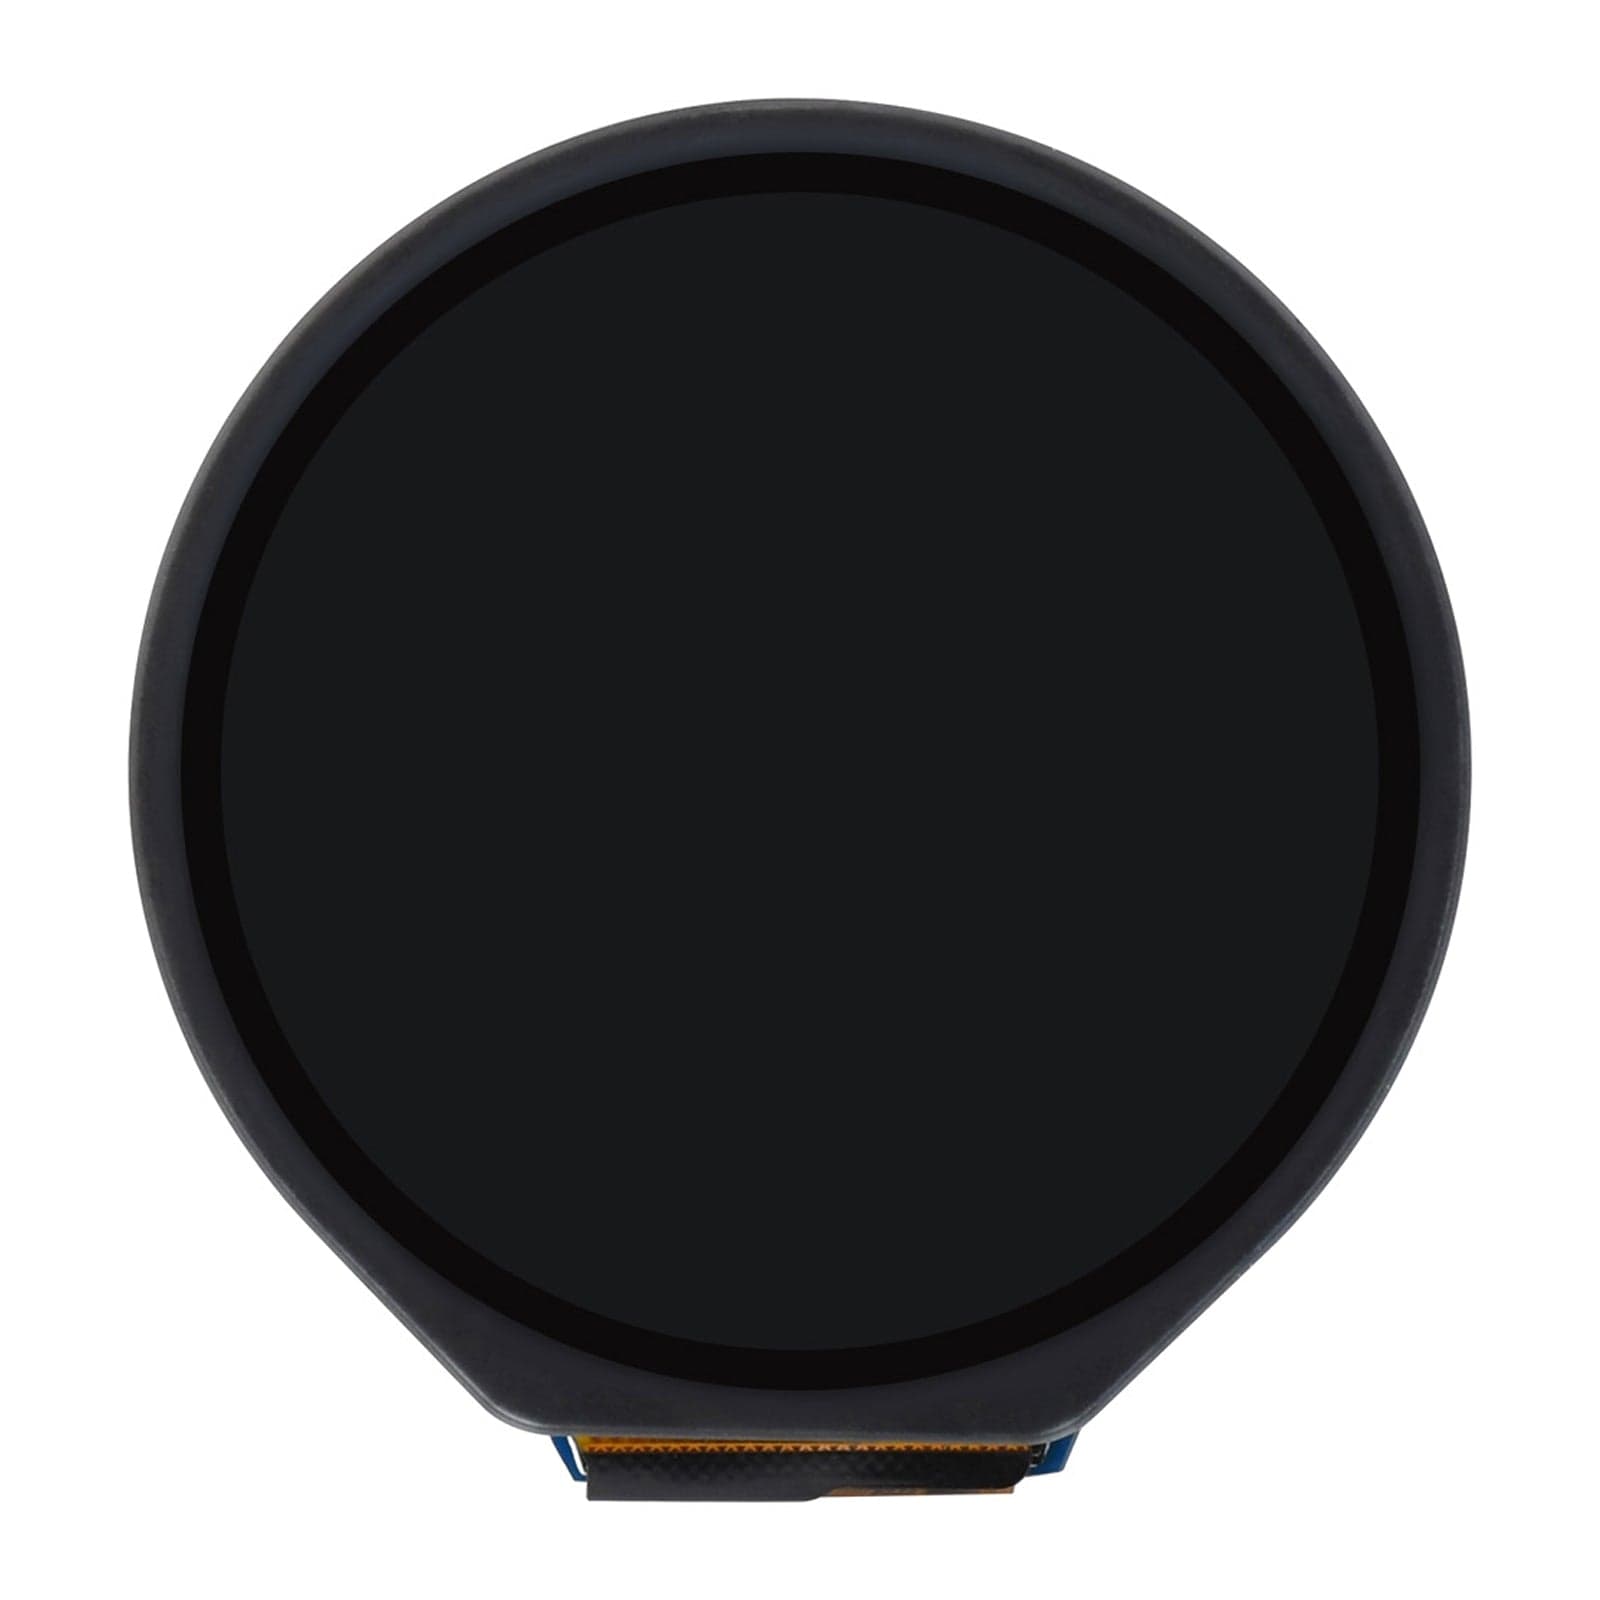 1.28" Round Touchscreen LCD Display Module - The Pi Hut